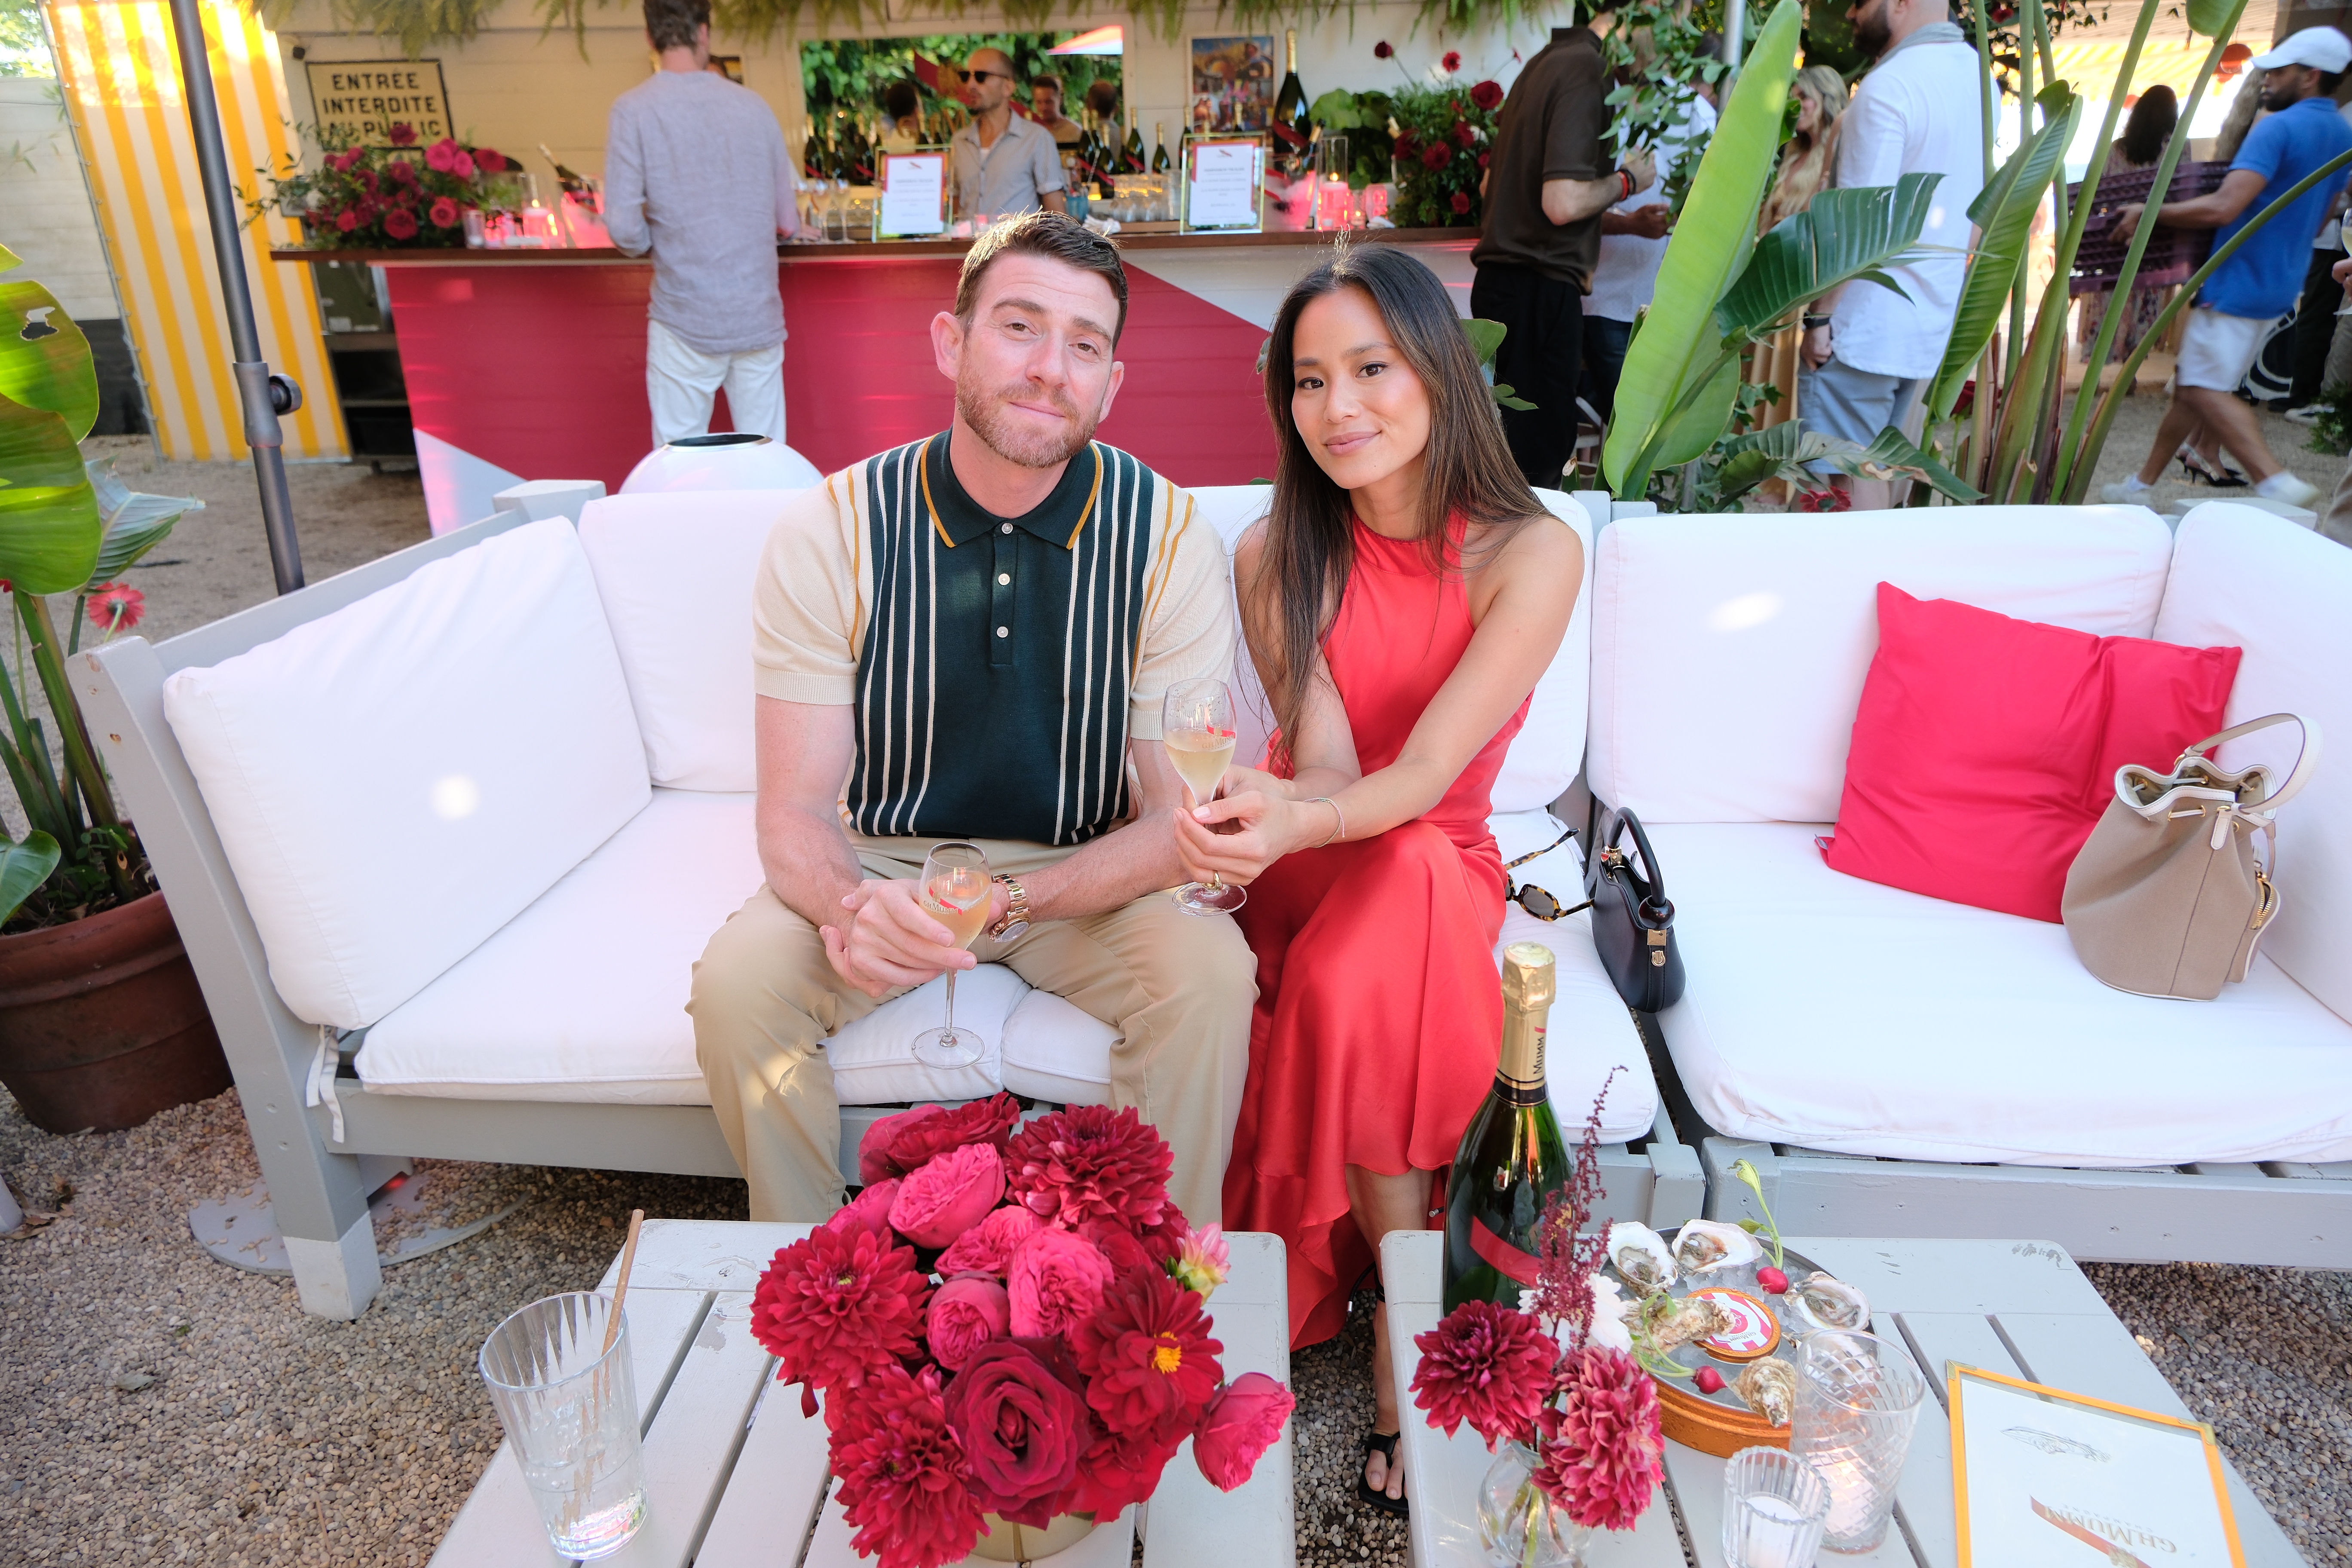 Sunset Beach - A Curated Evening with Bryan Greenberg and Jamie Chung